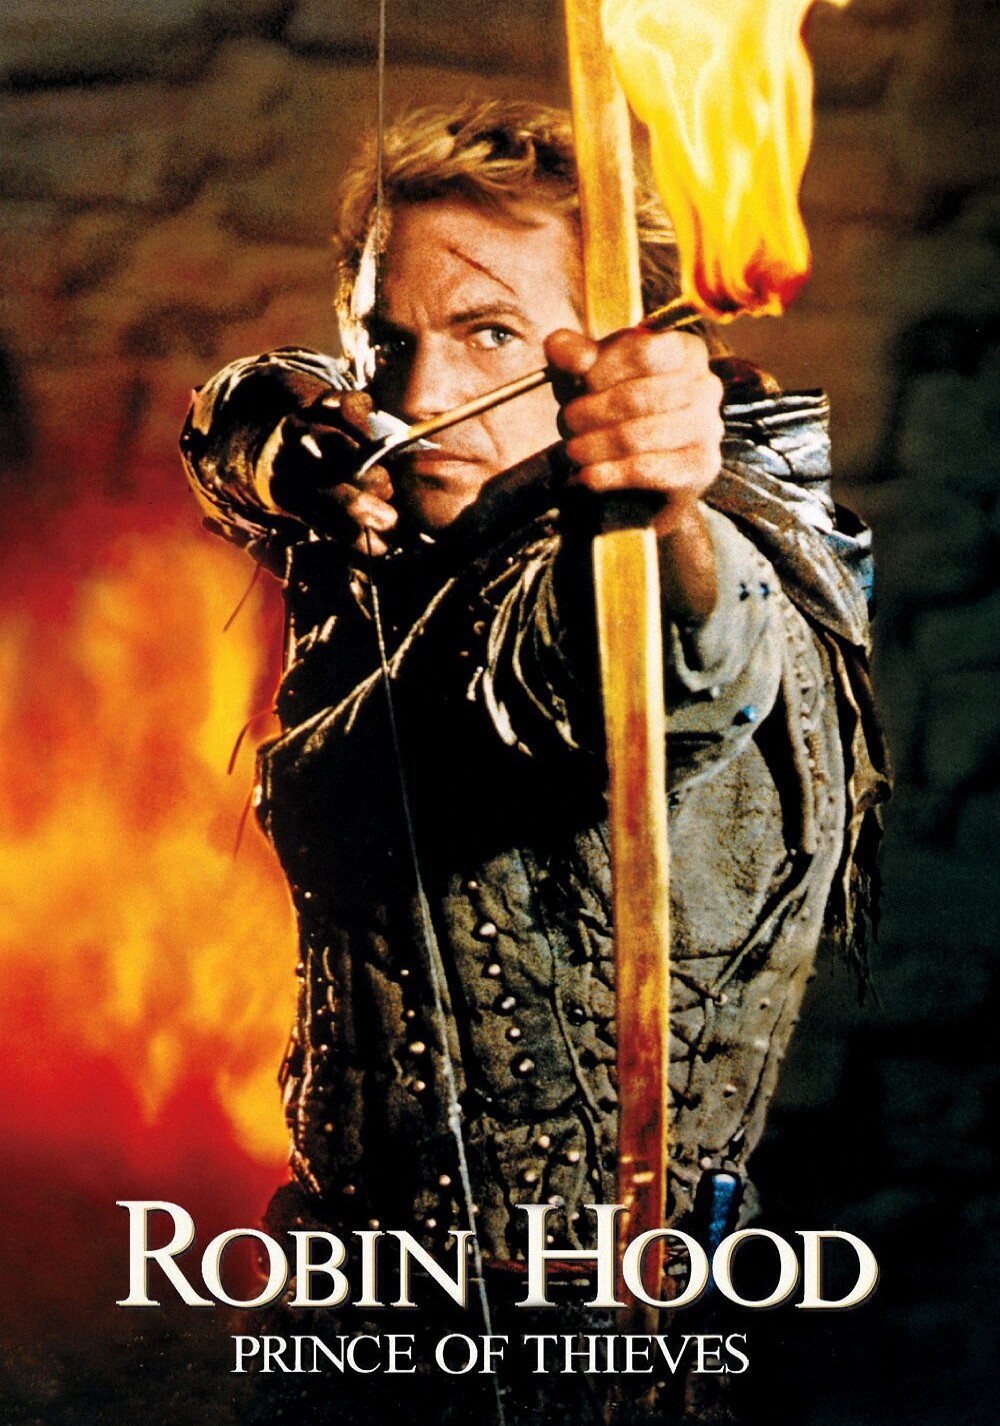 Robin Hood Prince of Thieves 1991 EXTENDED 2160p BluRay x264 8bit SDR DTS-HD MA 5 1-SWTYBLZ